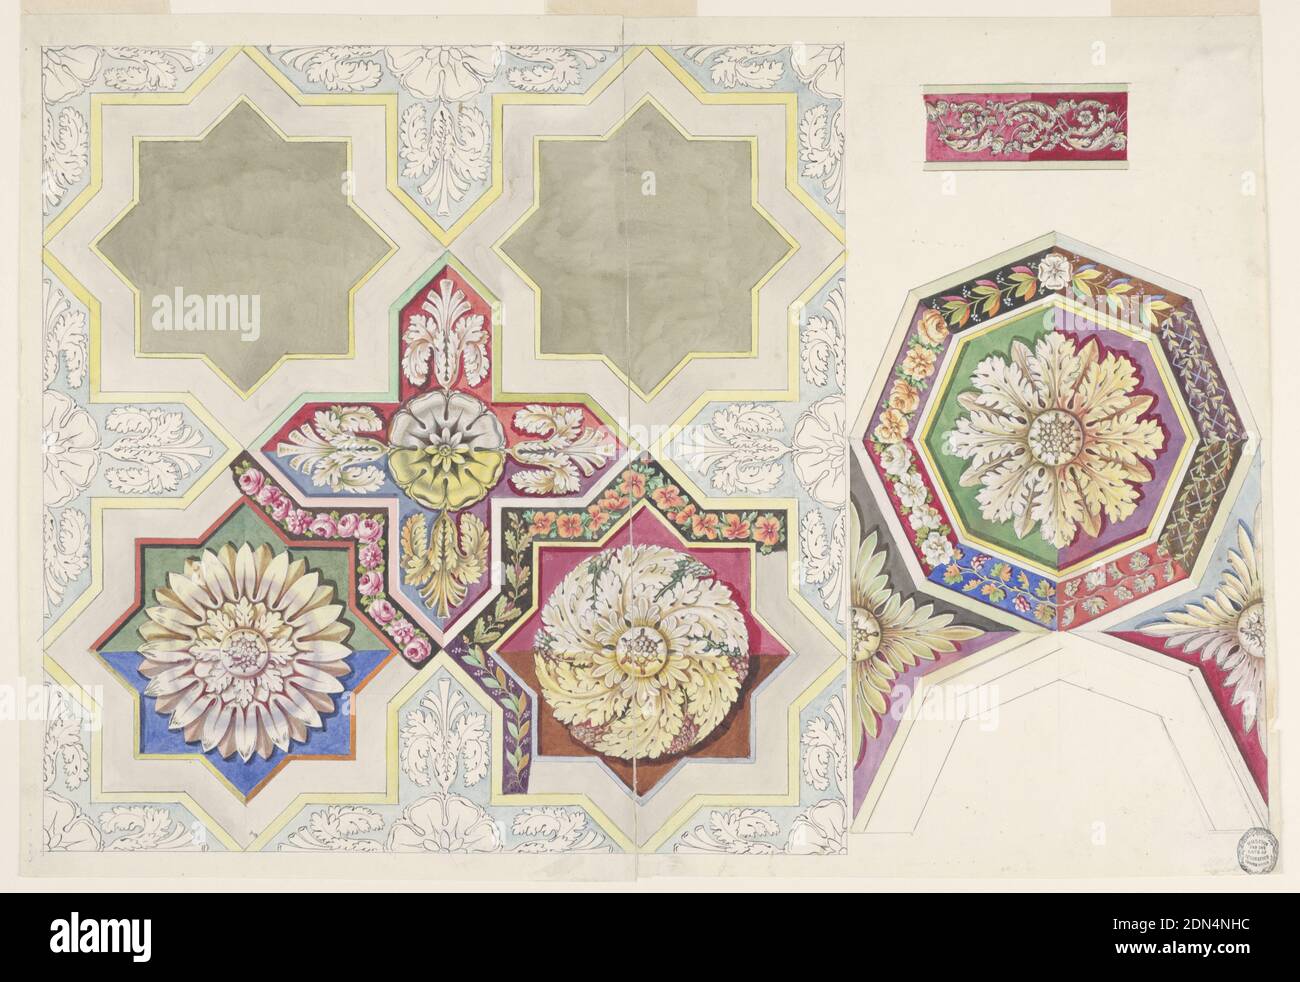 Design for Ceiling, City Hall, Vienna, Austria, Friedrich von Schmidt, German, 1825 - 1891, Brush and watercolor, pen and black ink, graphite on paper, Vertical format. At left, part of a ceiling showing four panels with sixteen sides, a panel shaped like an equal cross, and four halves and four quarters. The cross is decorated with a blossom rosette at center and four palmettes. Two rosettes are suggested for the other panels with four different colorings of the background. Various designs for leaf stems; garlands are suggested for the bands representing the panels. Stock Photo